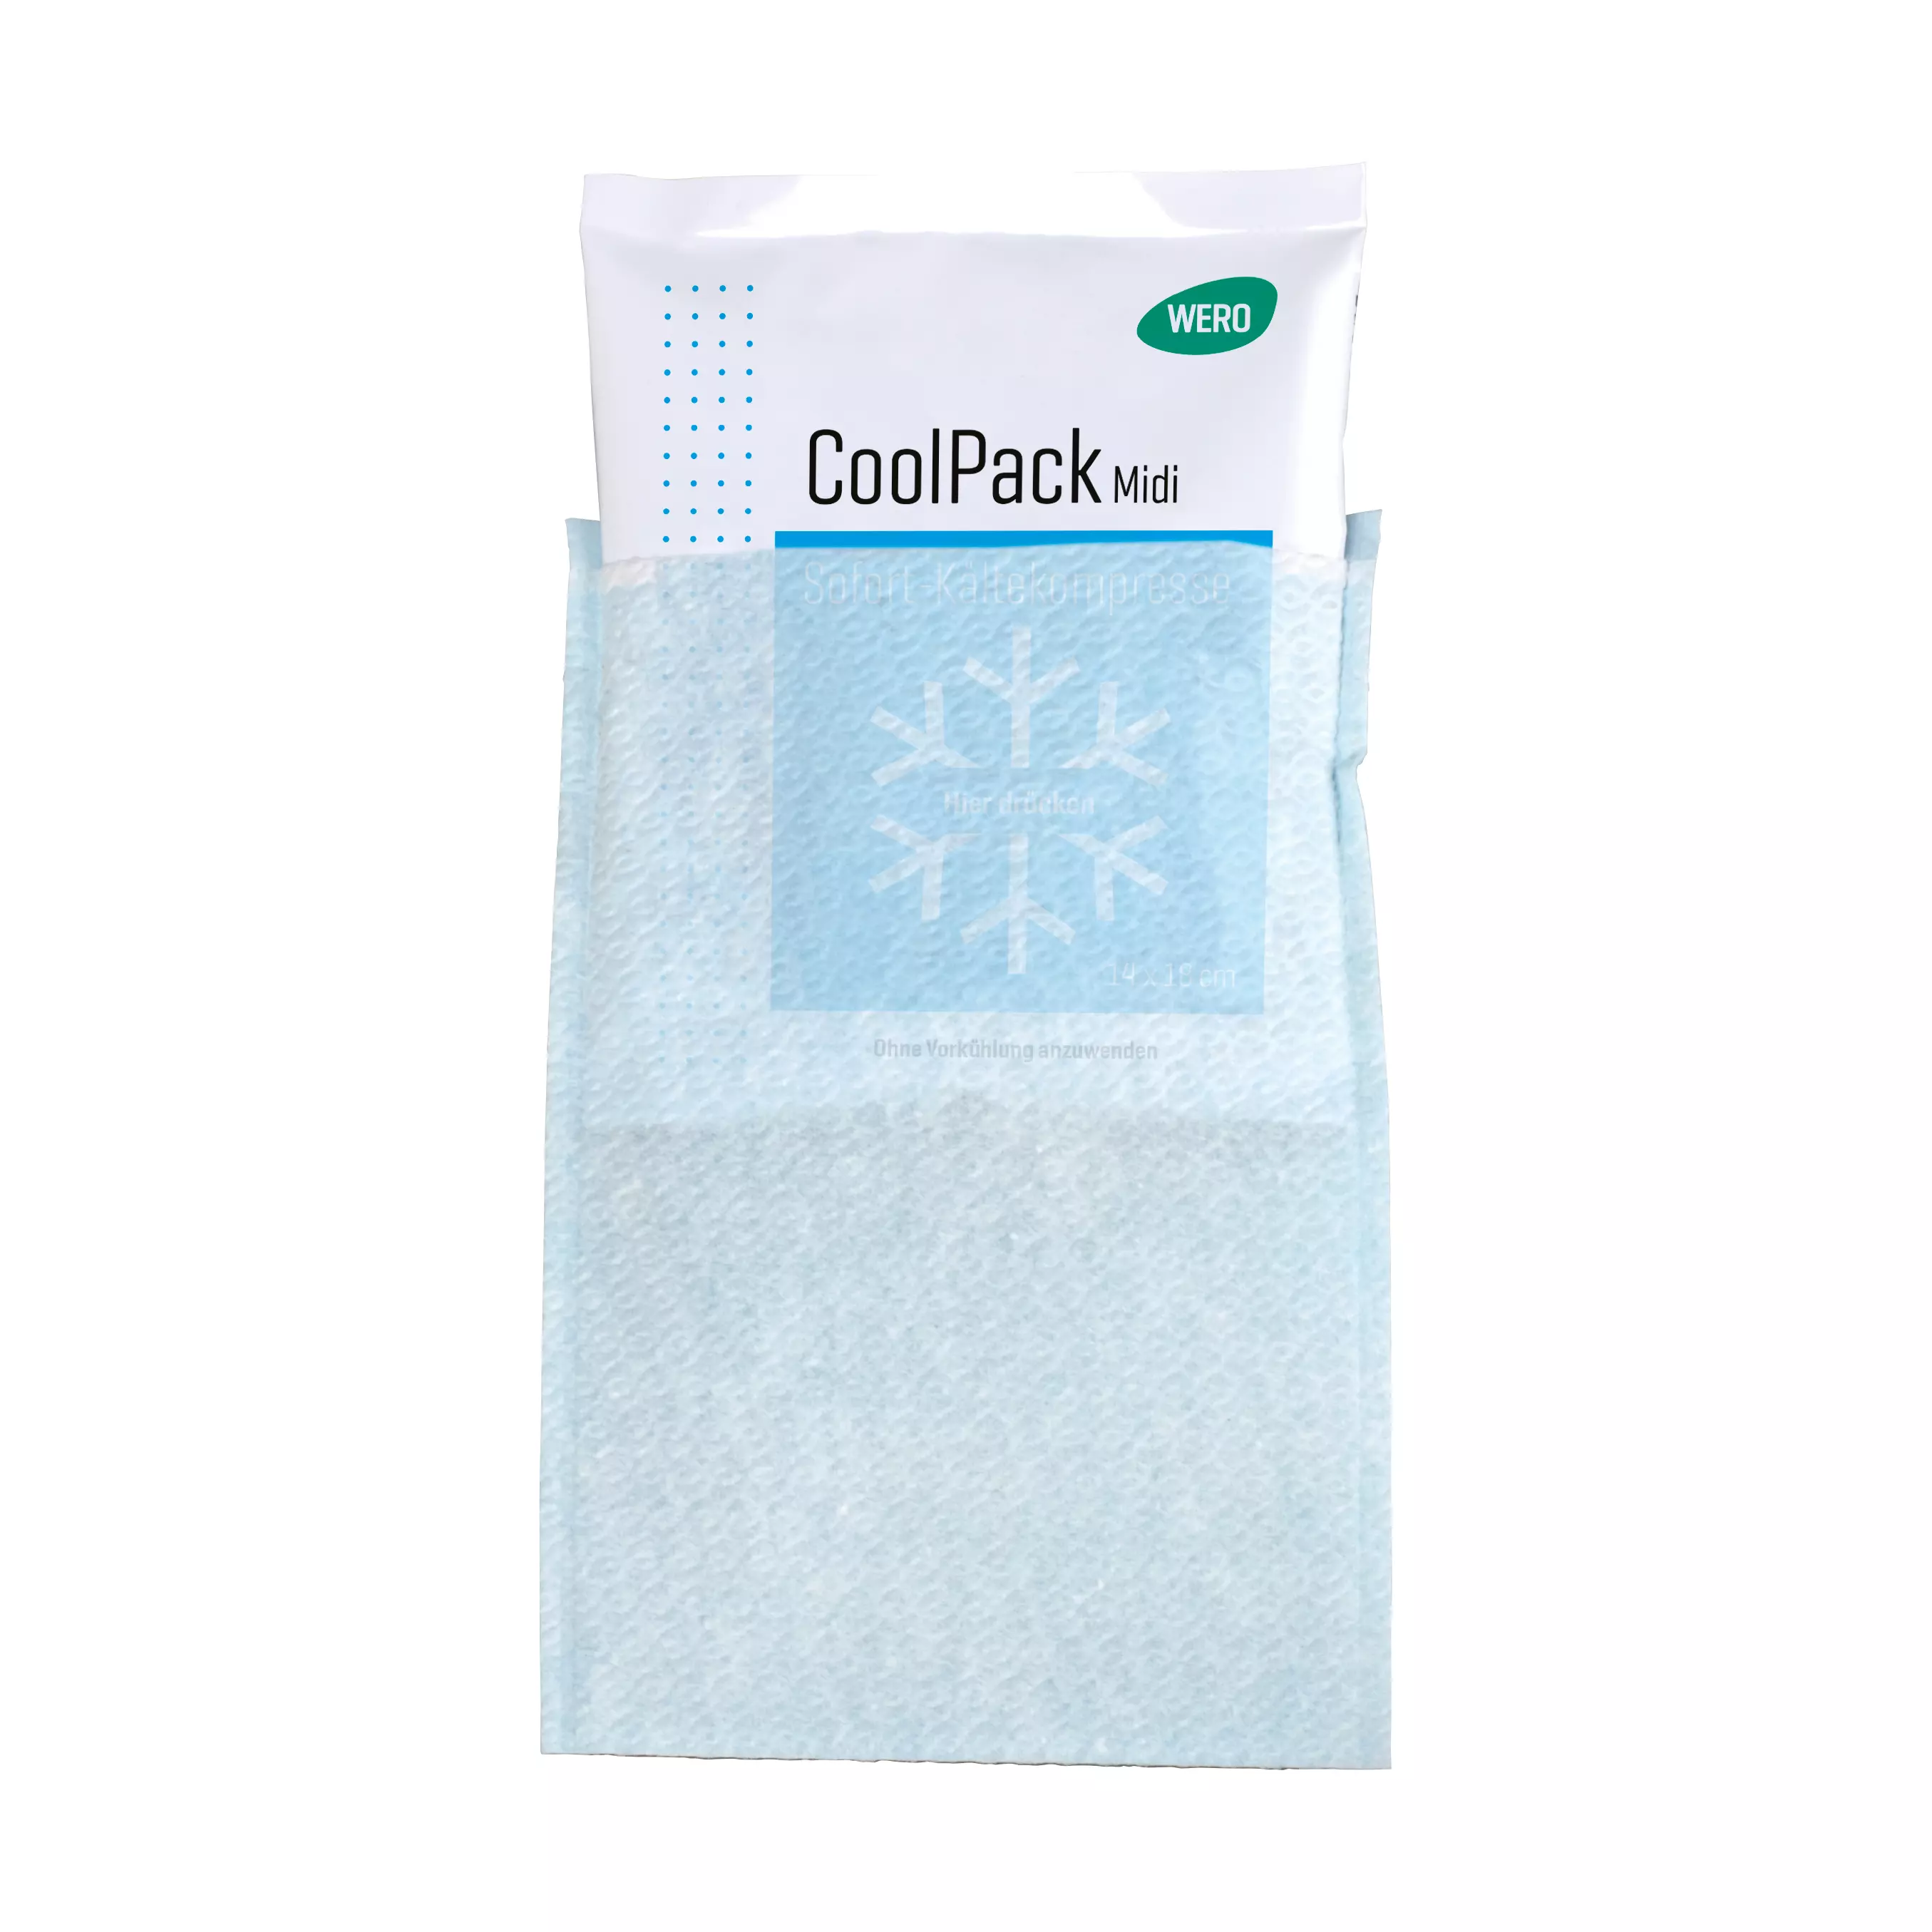 Disposable non-woven cover for instant cold compresses, 10 pcs